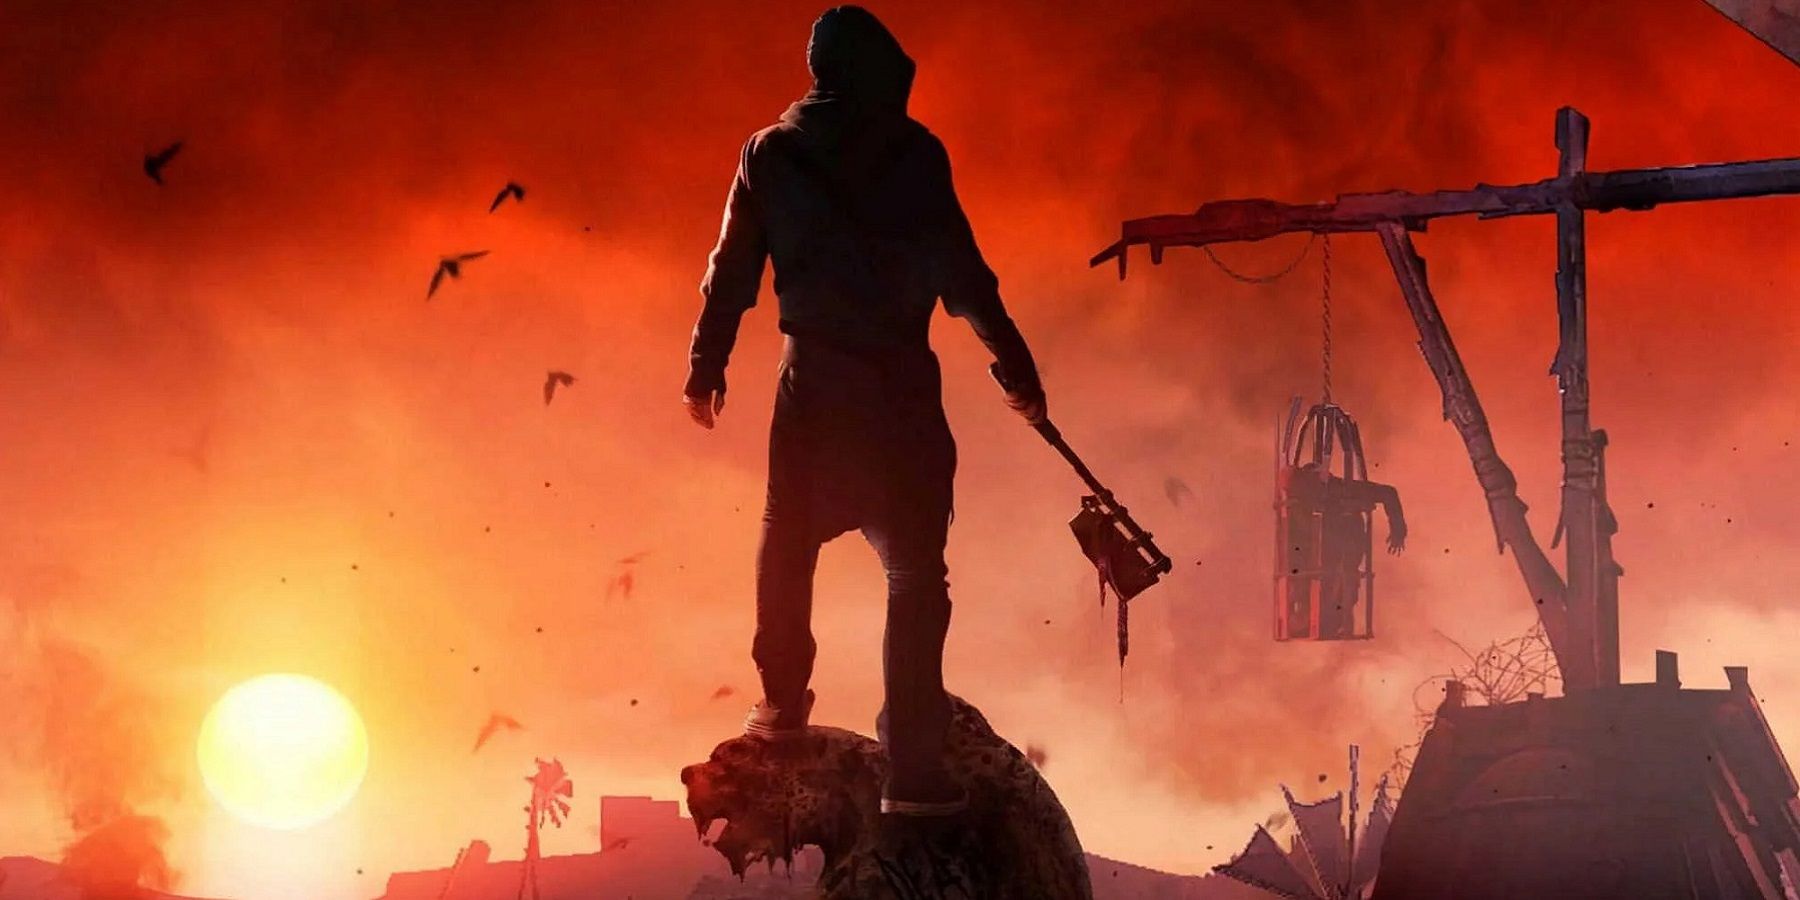 Image from Dying Light 2 showing a silhouette of the player standing on top of a gargoyle during sunset.